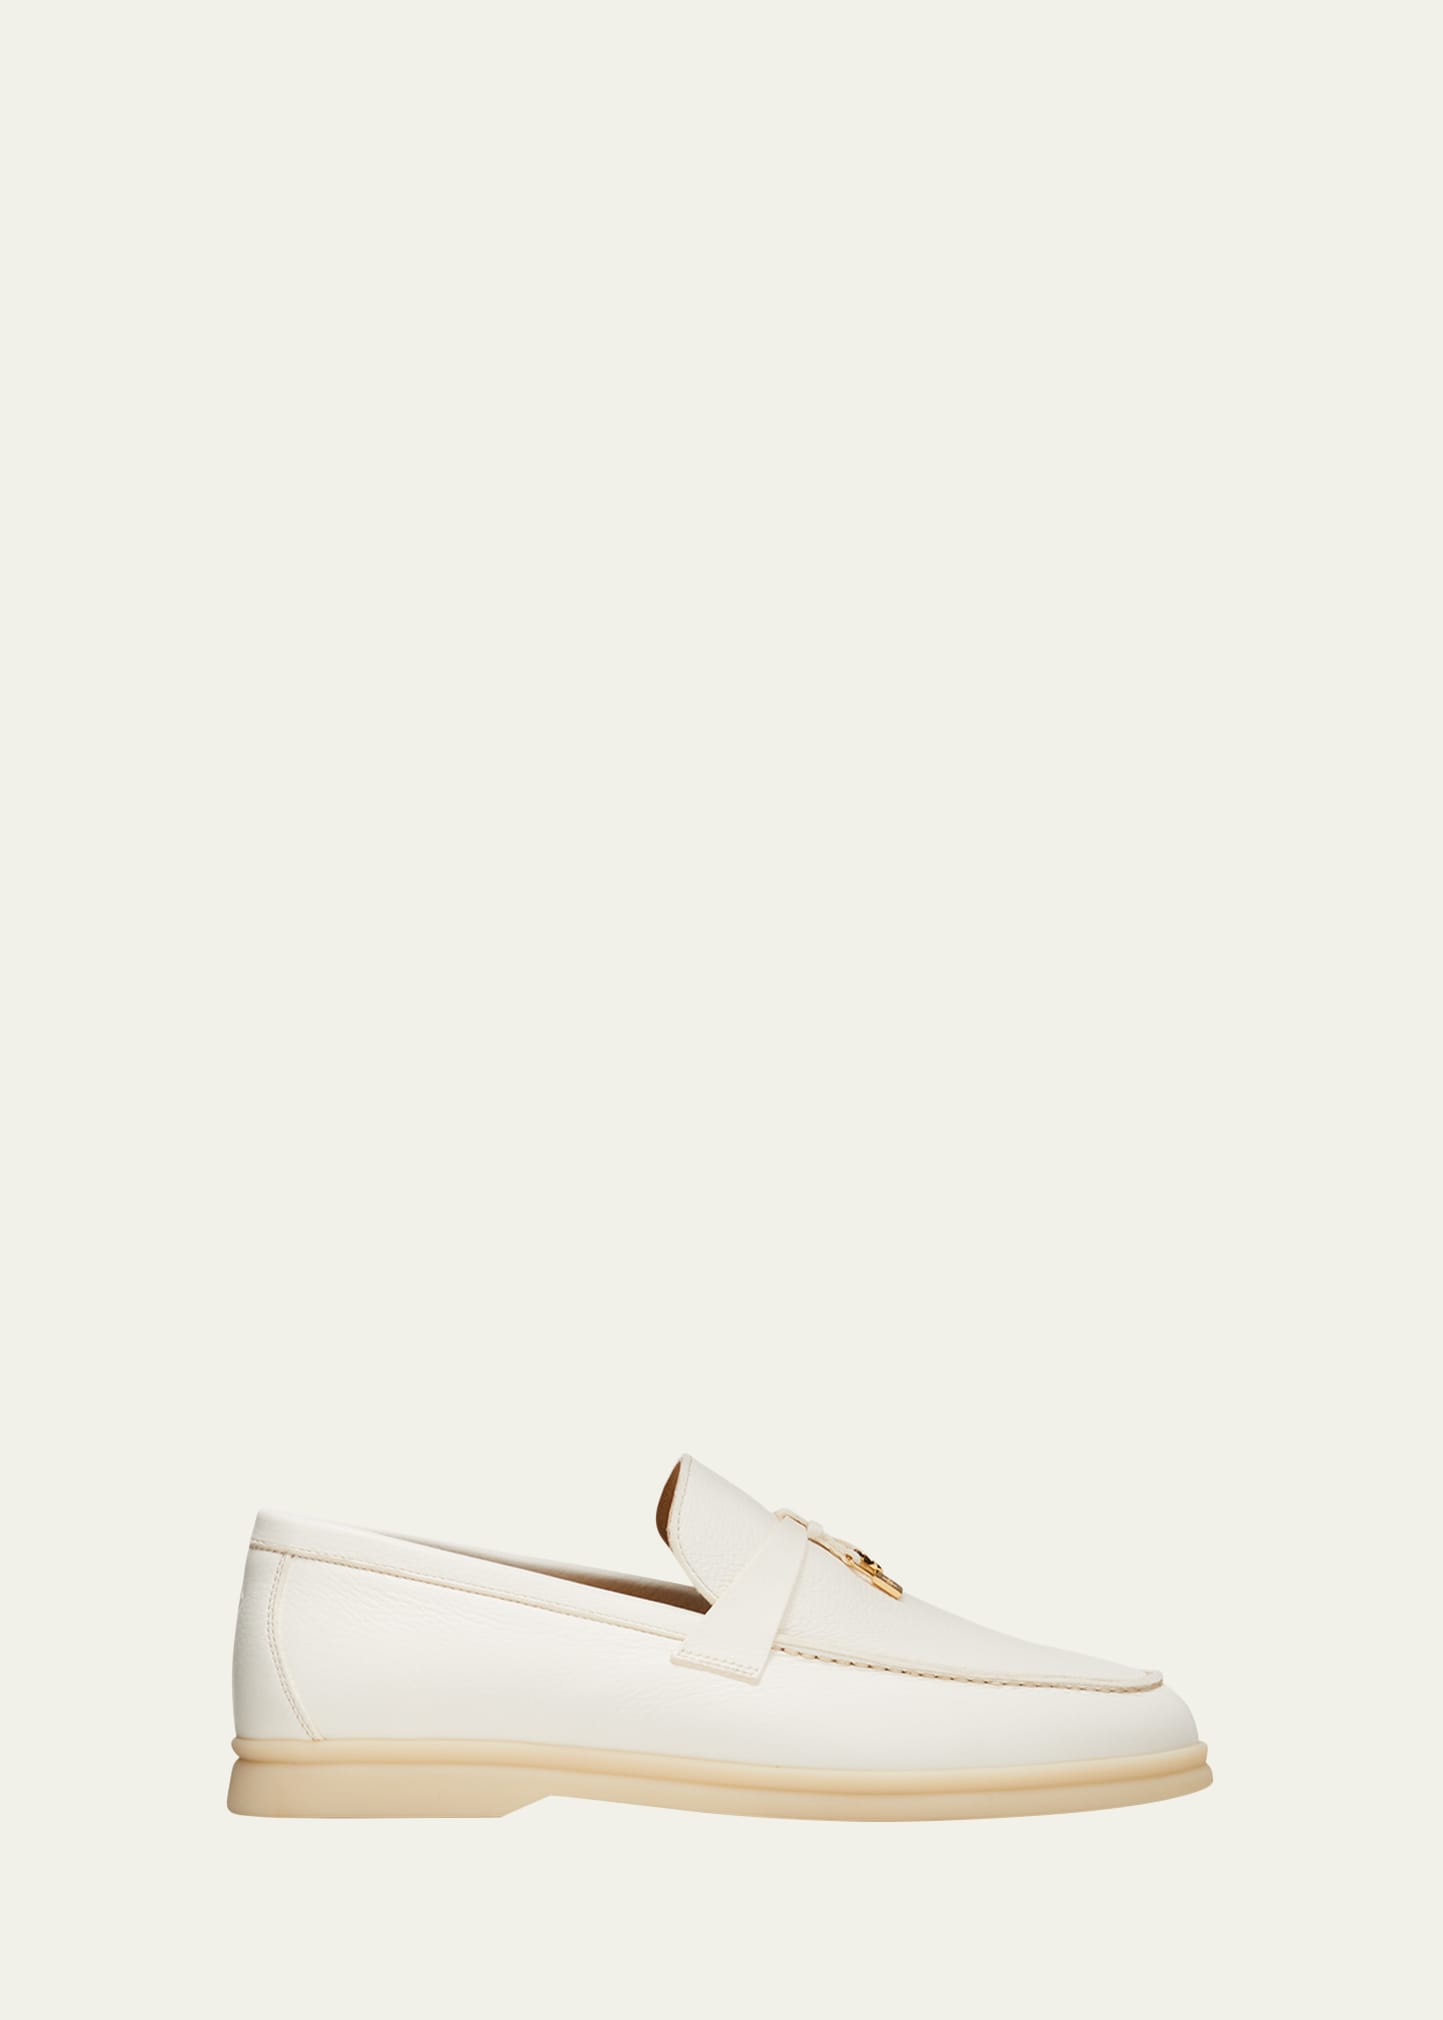 LORO PIANA SUMMER CHARMS LEATHER SLIP-ON LOAFERS